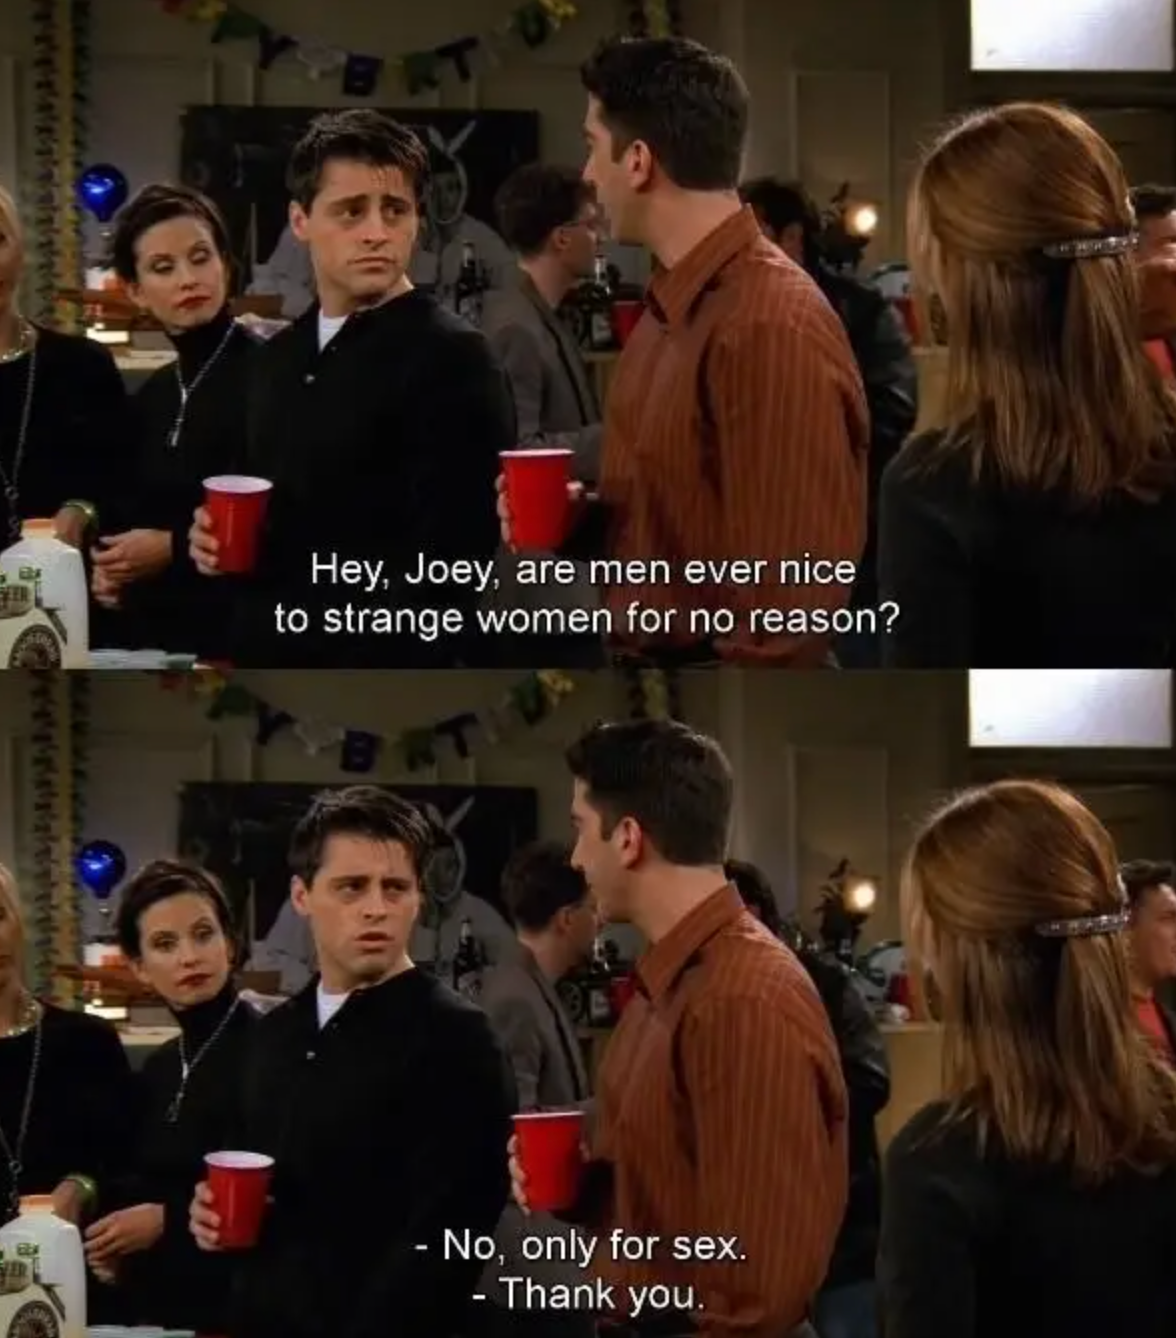 Friends Scene: Ross asks Joey, 'are guys nice to strange woman for no reason?' Joey replies 'No only for sex"